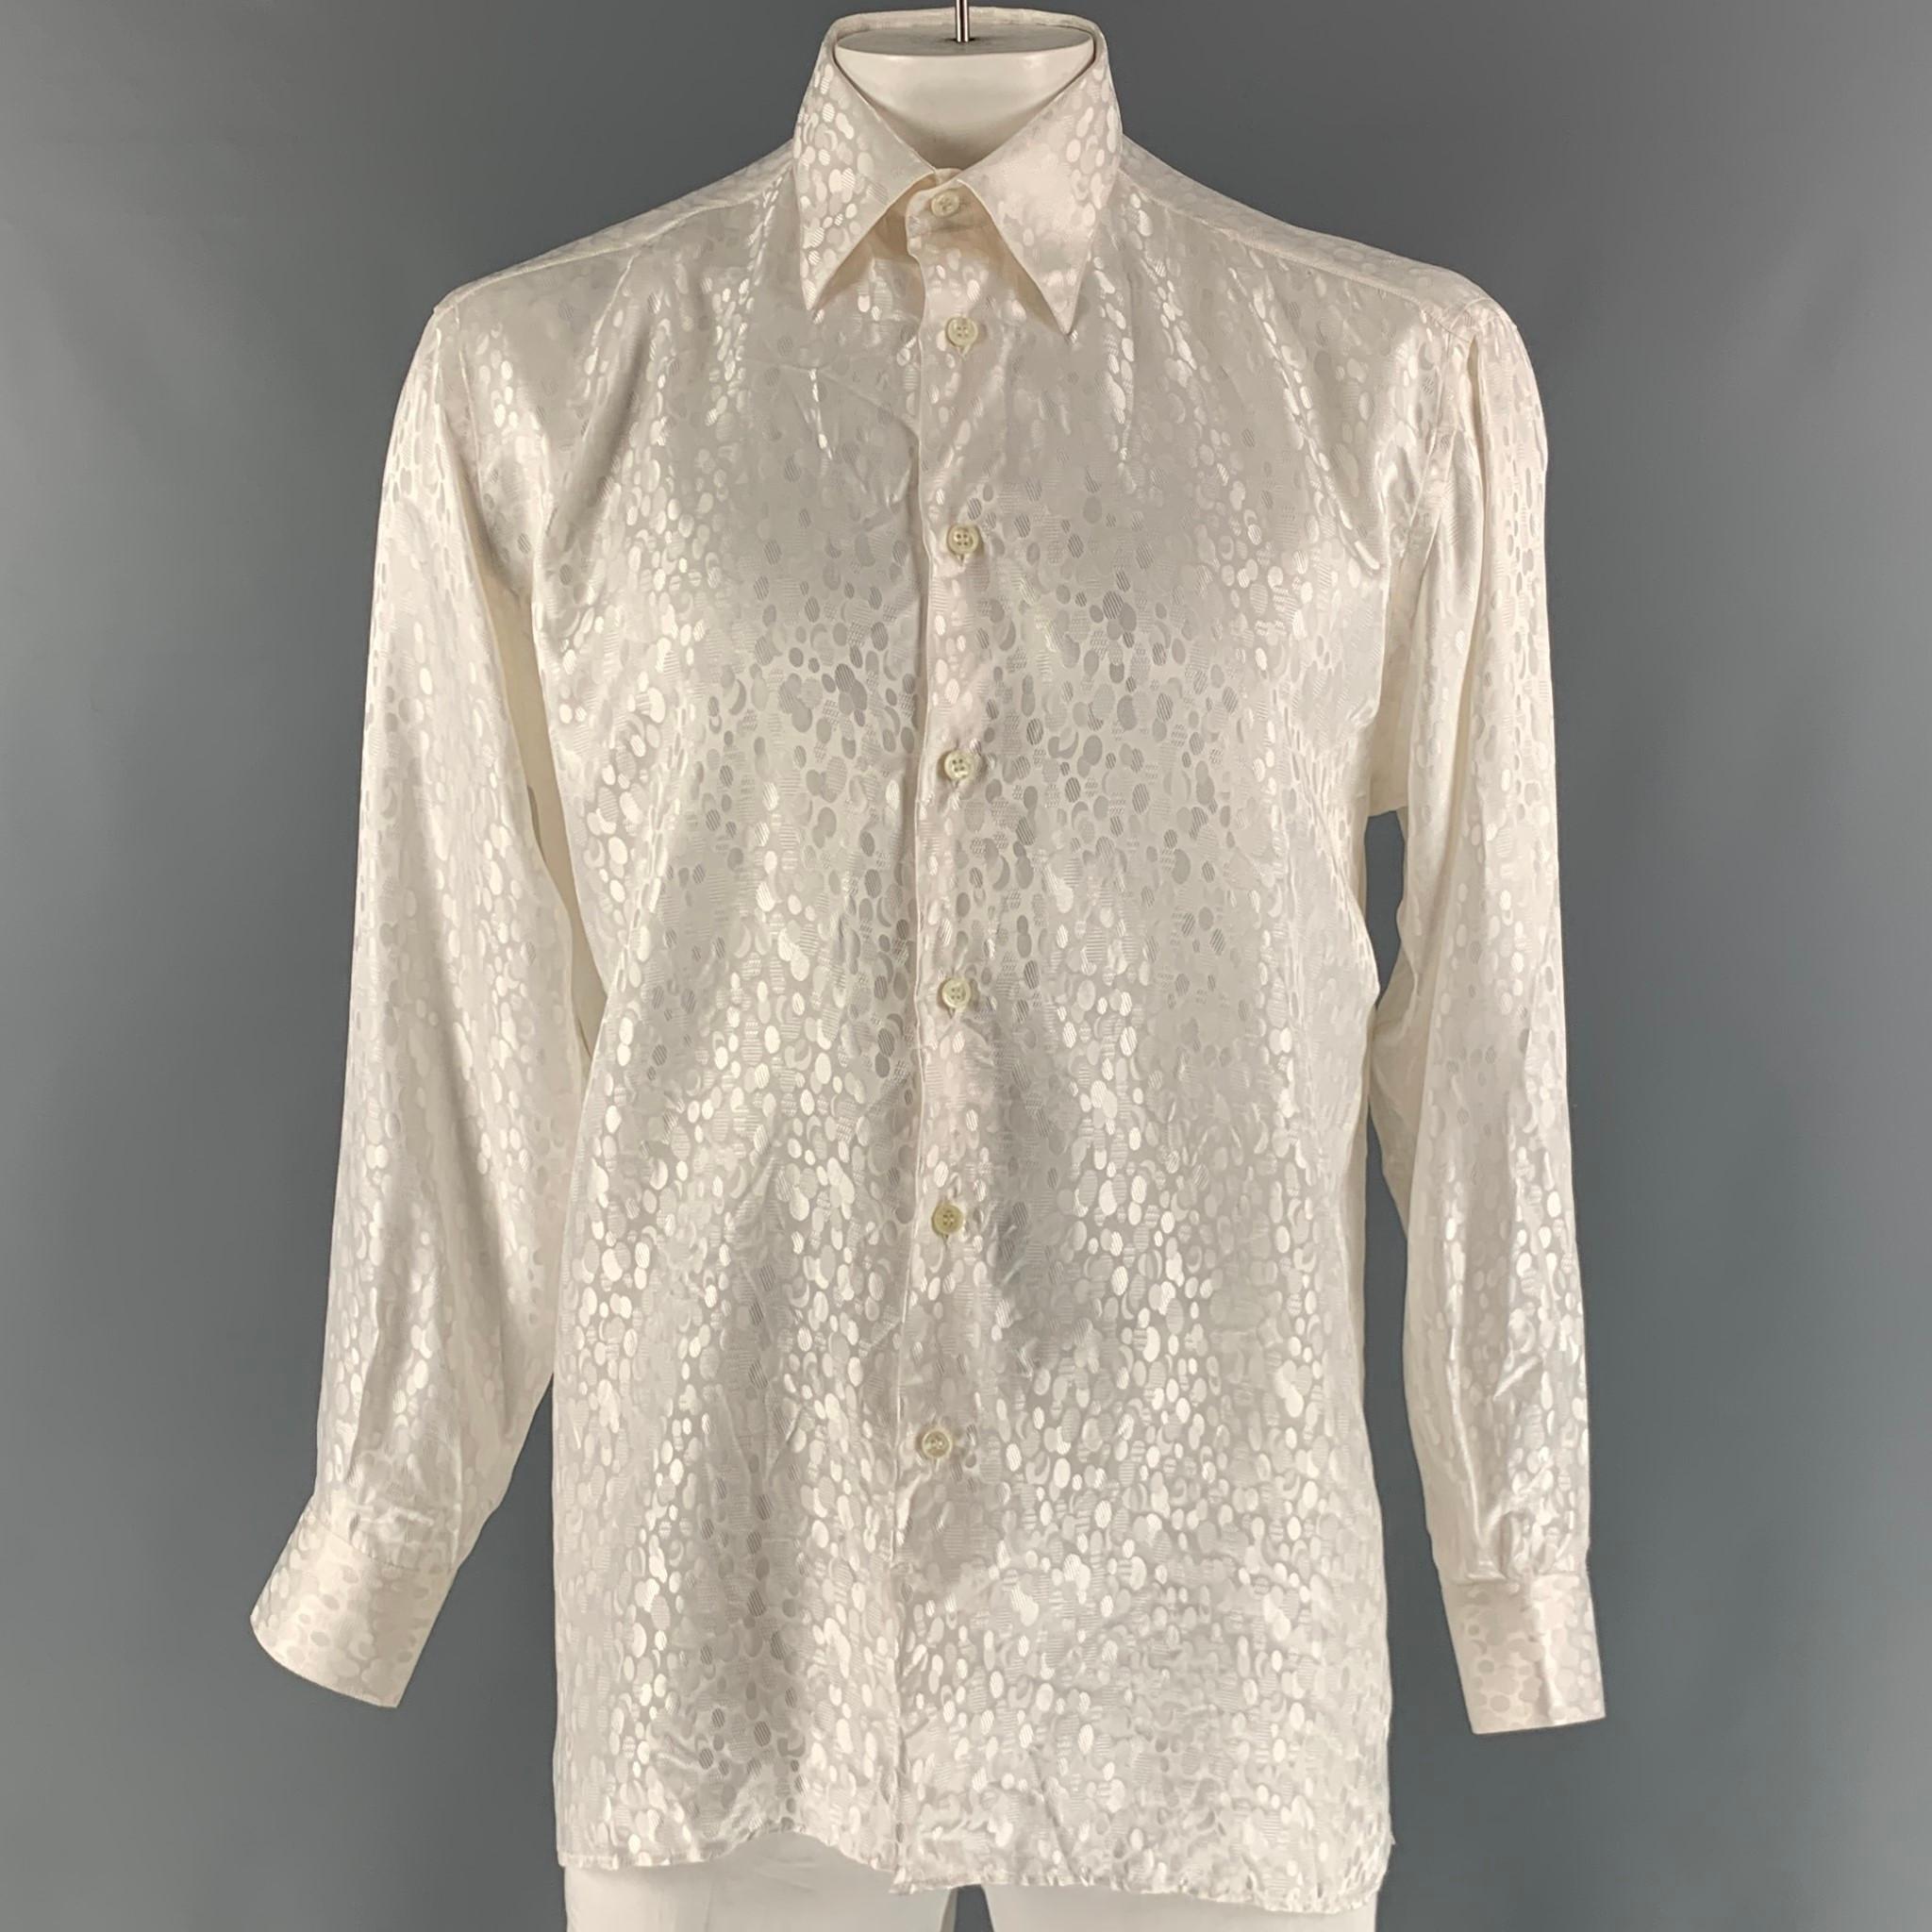 GIANNI VIERA long sleeve shirt comes in a white dots jacquard silk material featuring a classic style, straight collar, and a button up closure. Made in Italy.

Very Good Pre-Owned Condition. Minor sign of wear.
Marked: L

Measurements:

Shoulder: